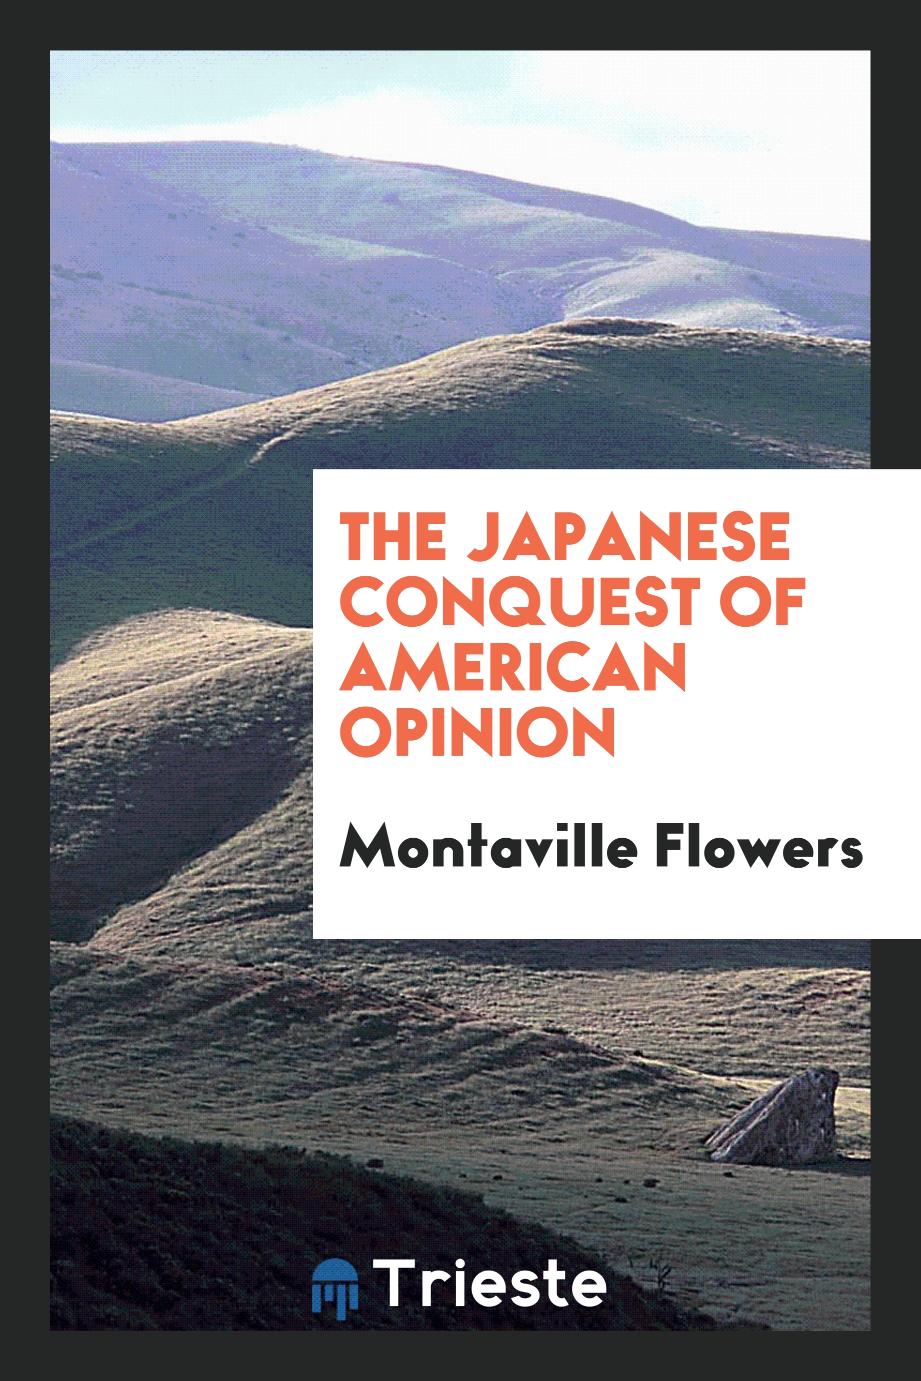 The Japanese conquest of American opinion